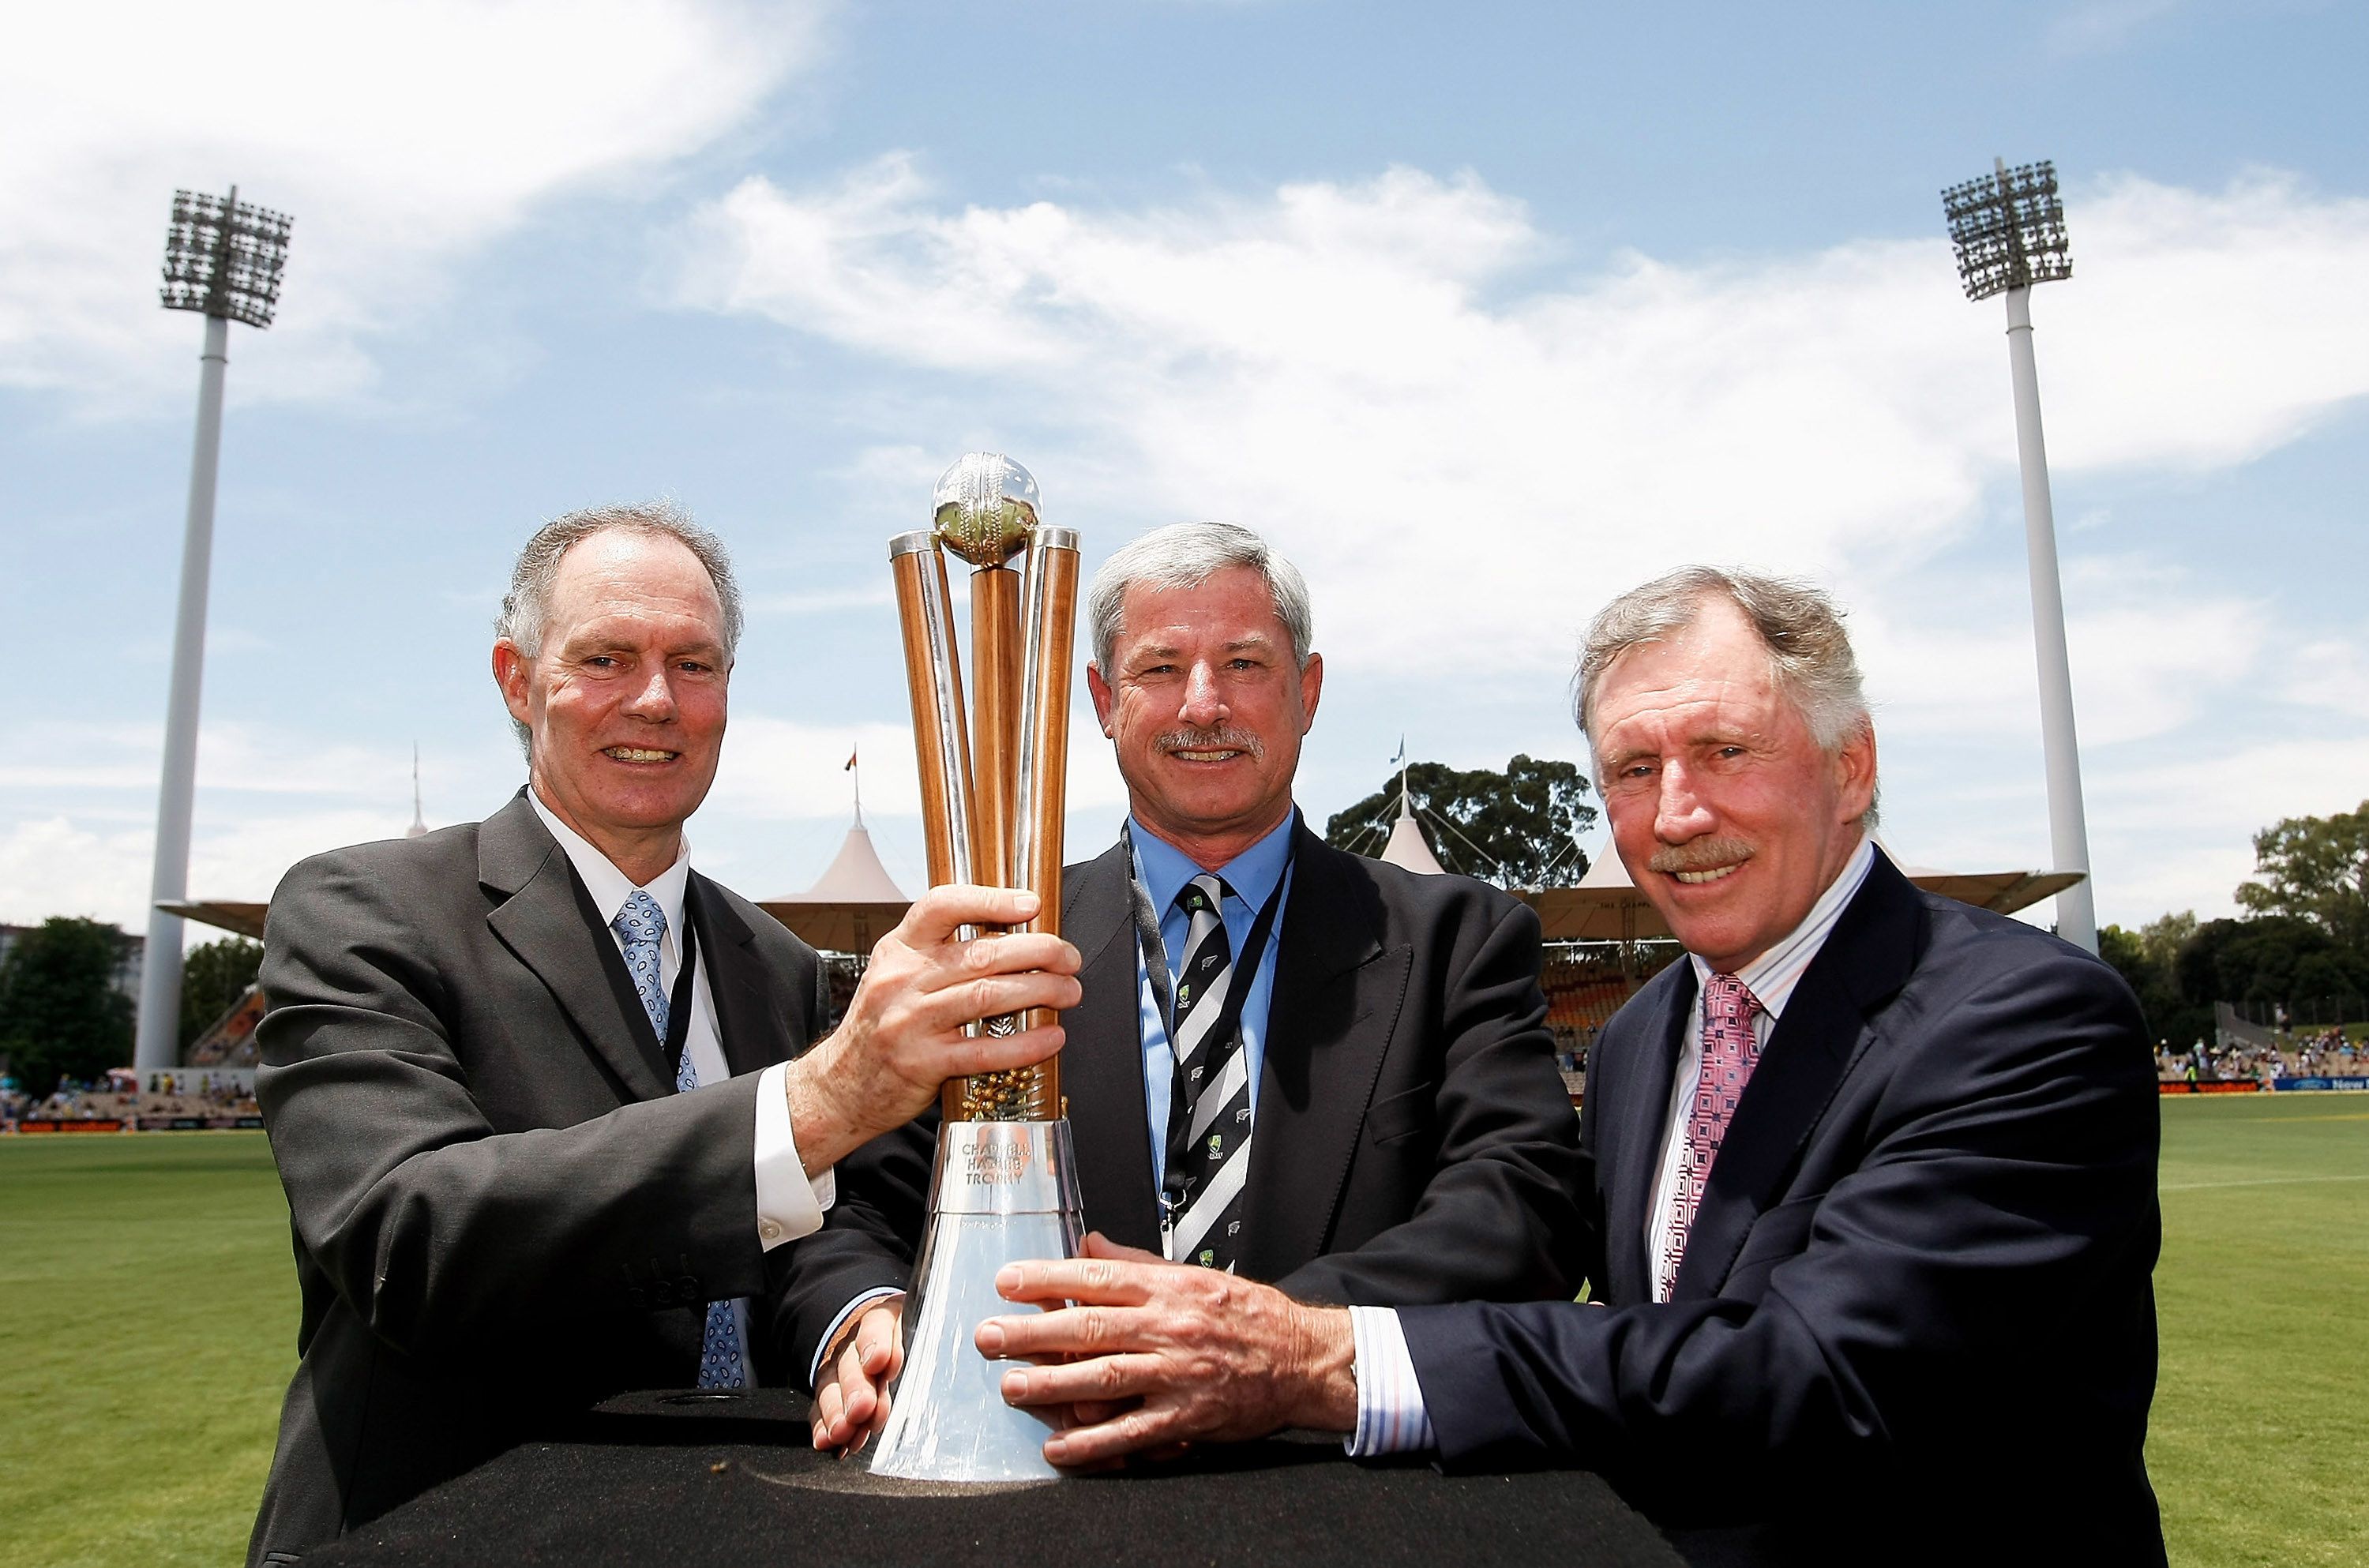 EXCLUSIVE: Ian Chappell hits out over 50-over cricket neglect after change to Chappell-Hadlee trophy